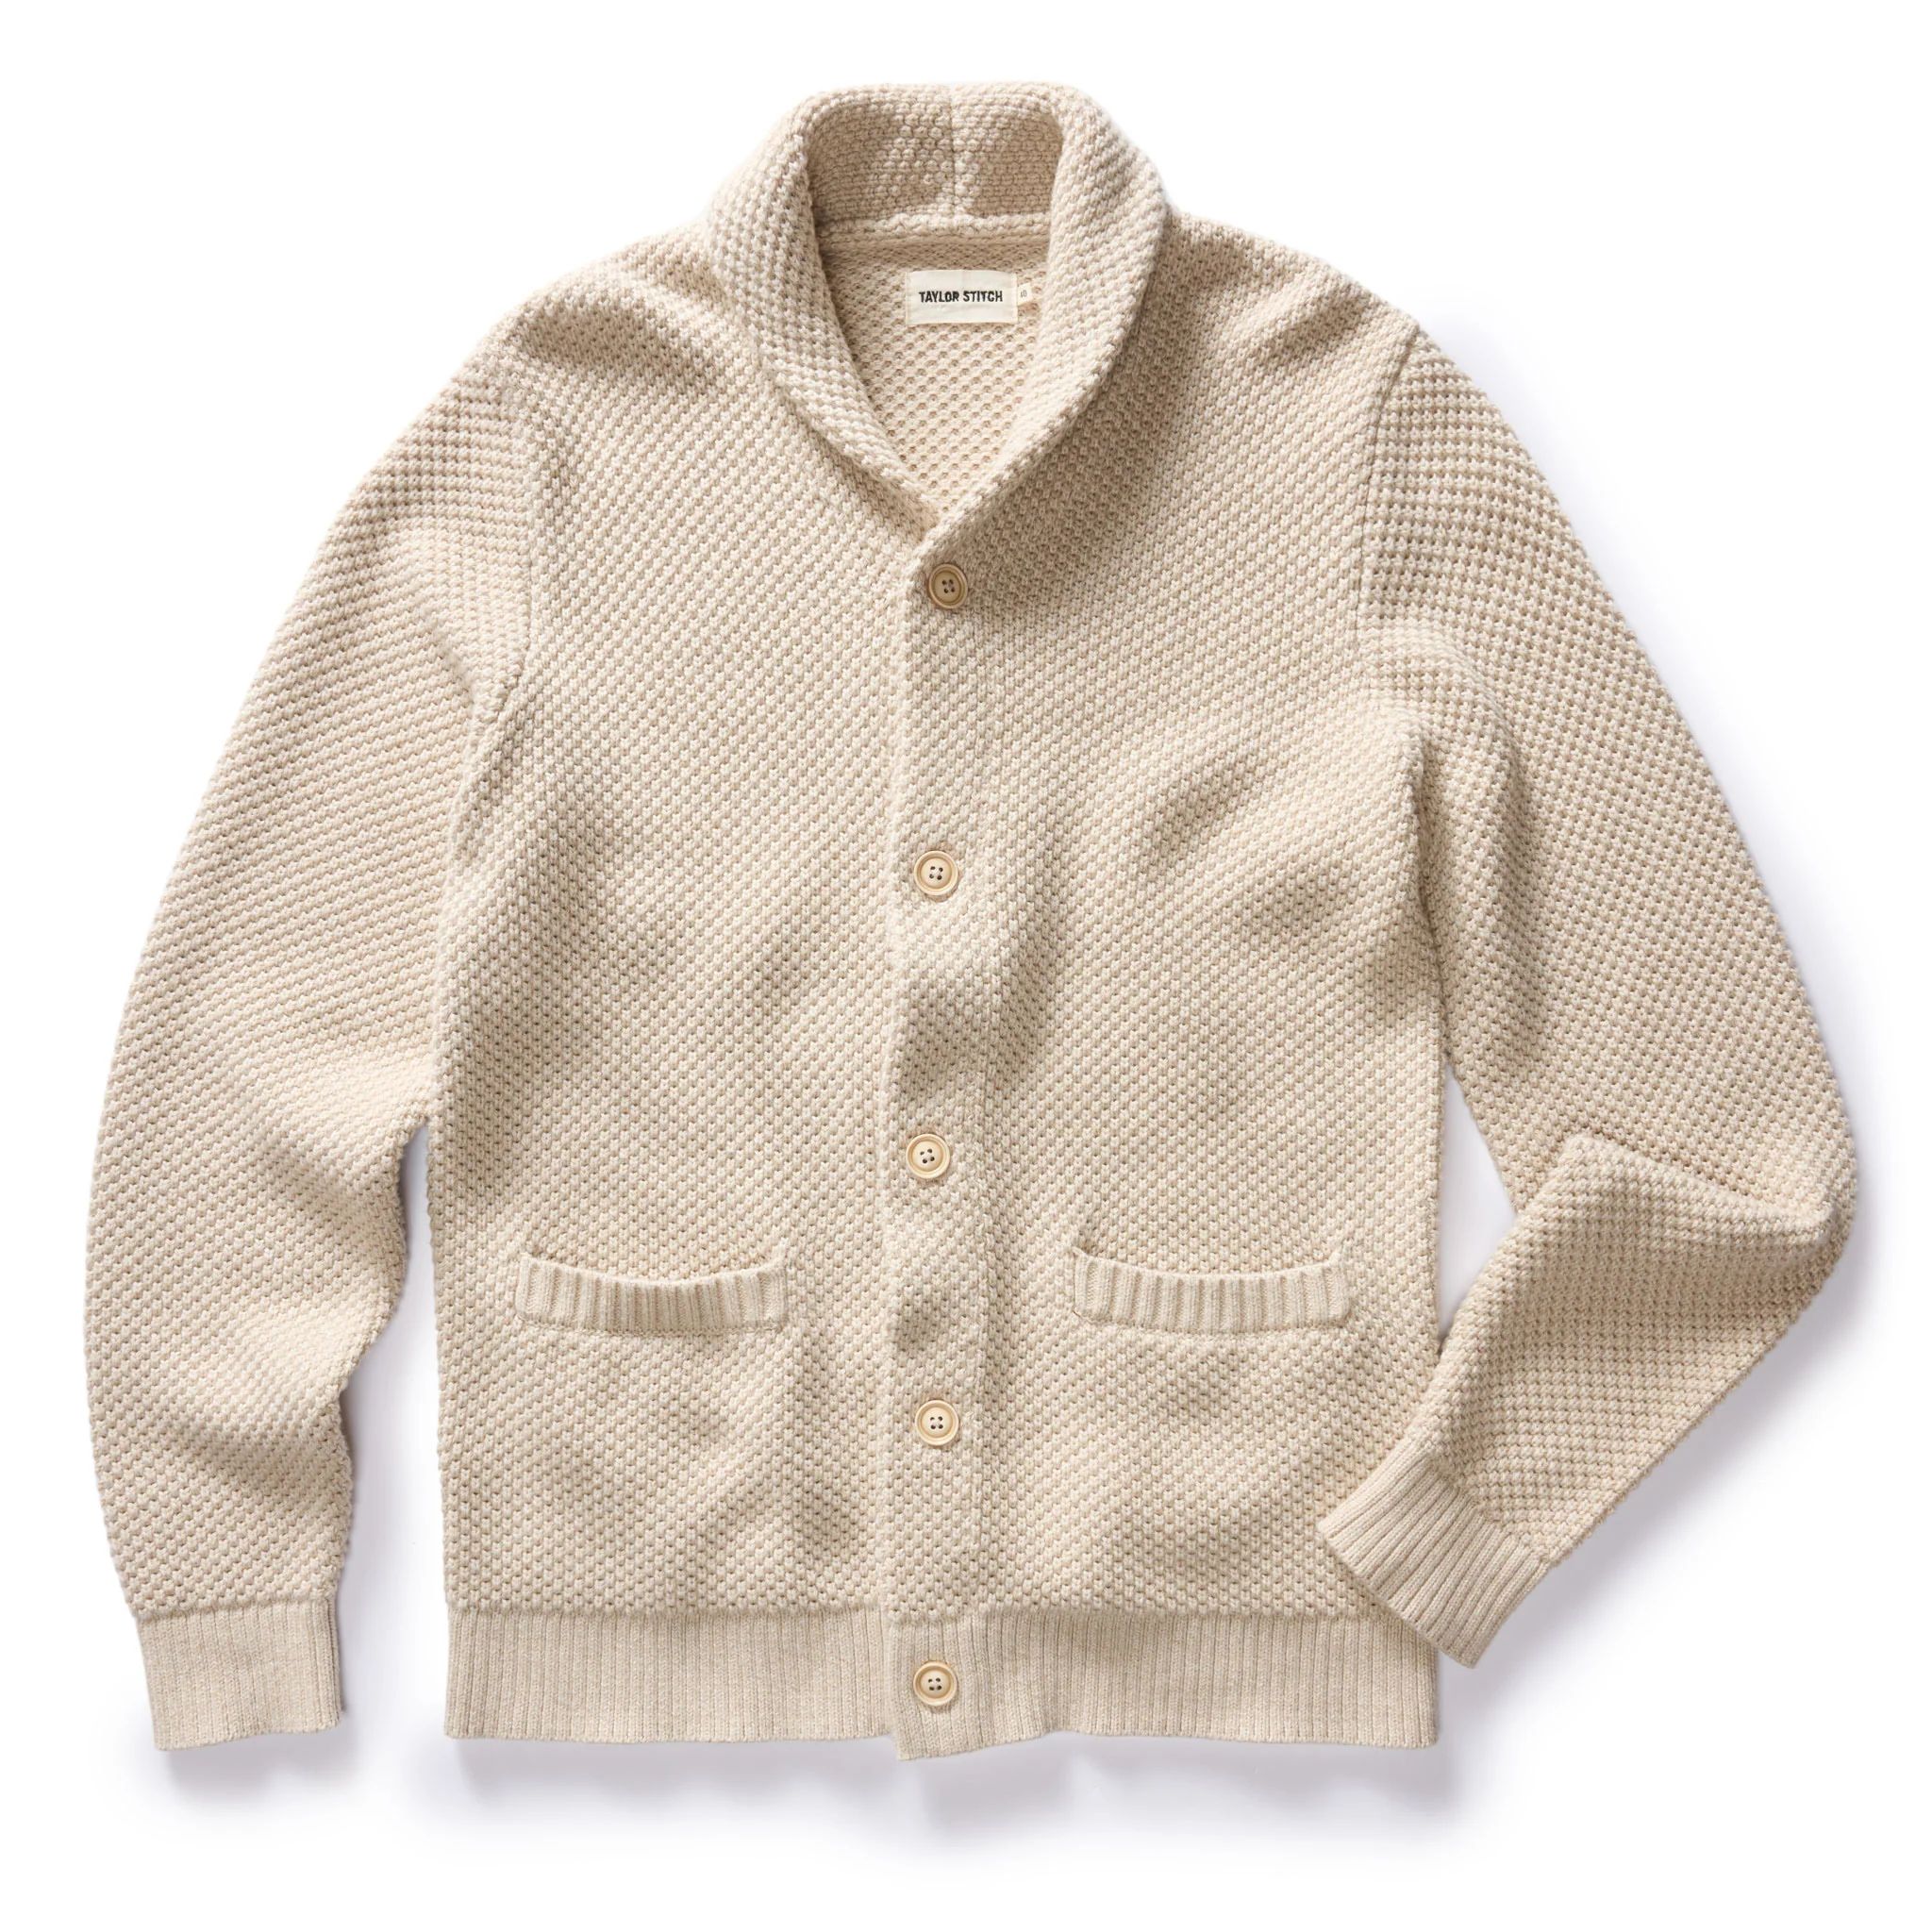 The Crawford Sweater in Marled Natural | Taylor Stitch